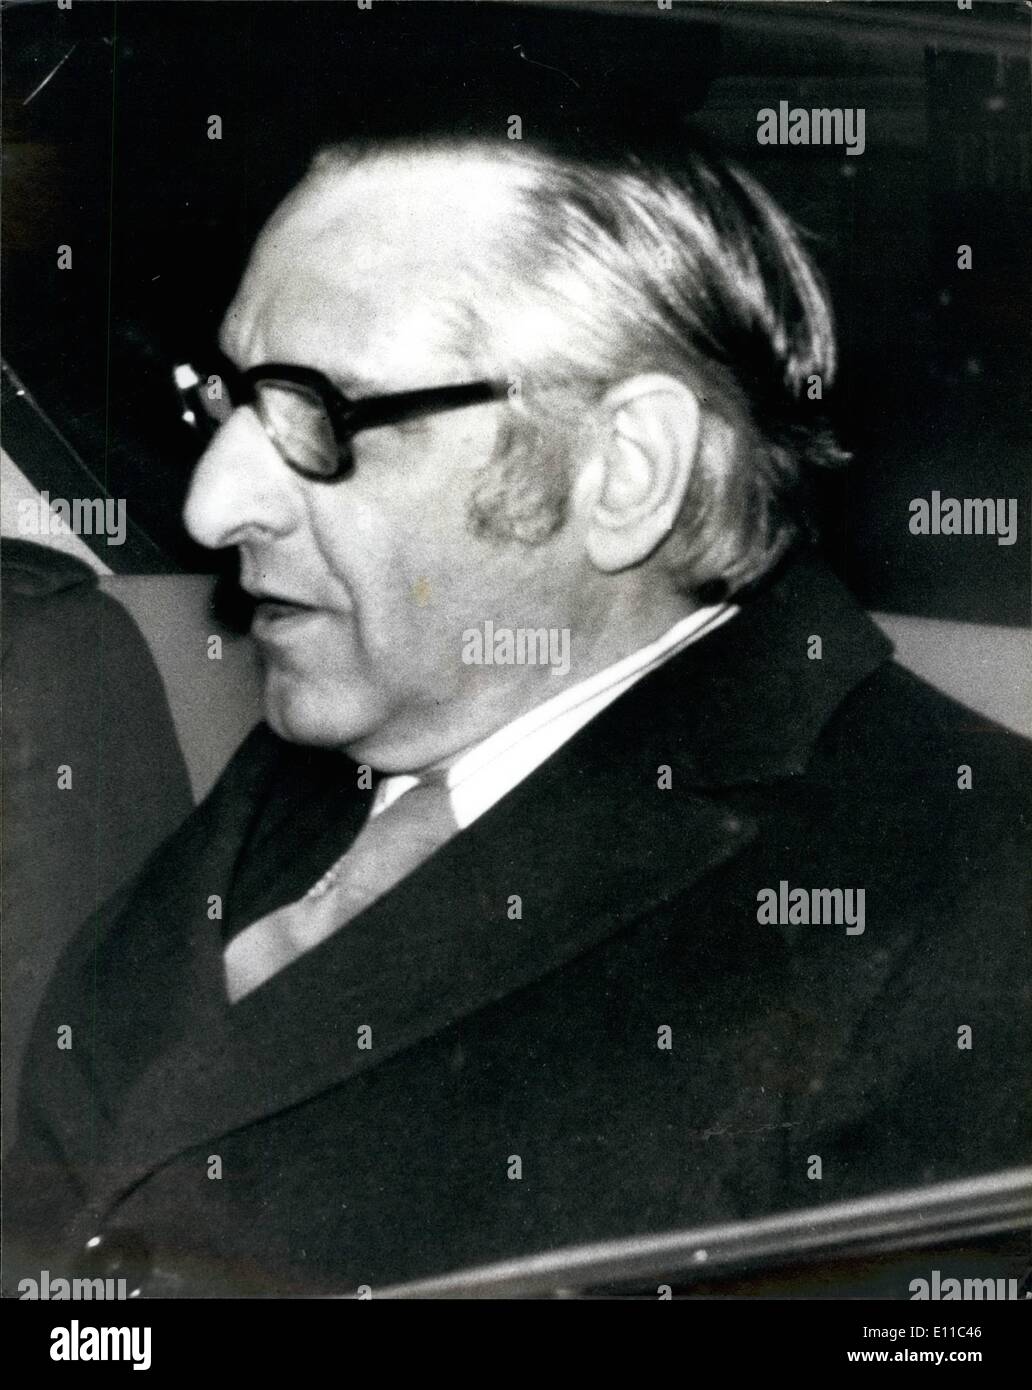 Jan. 01, 1977 - Attorney General Mr. Silkin At The Law Courts: Attorney General Mr. Sam Silkin, QC, was again appearing before the appeal court to explain his handling of the threatened South Africa boycott by the Post Office Workers union. Photo shows Attorney General Mr. Sam Silkin seen leaving the court after today's session. Stock Photo